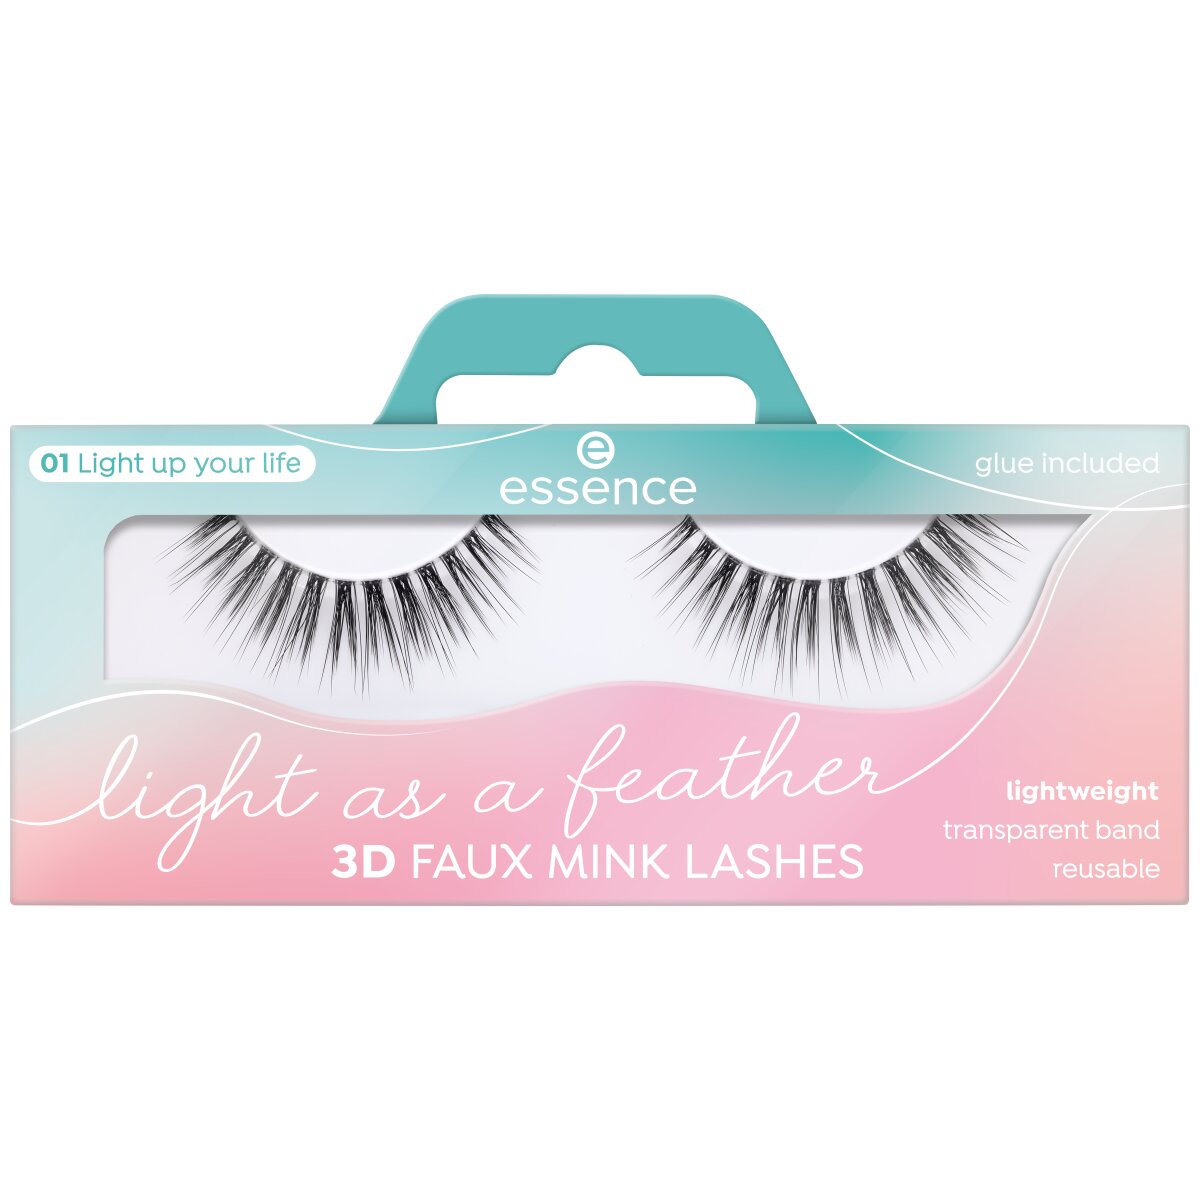 House of Feather essence Light A – Faux As Lashes 3D Cosmetics Mink